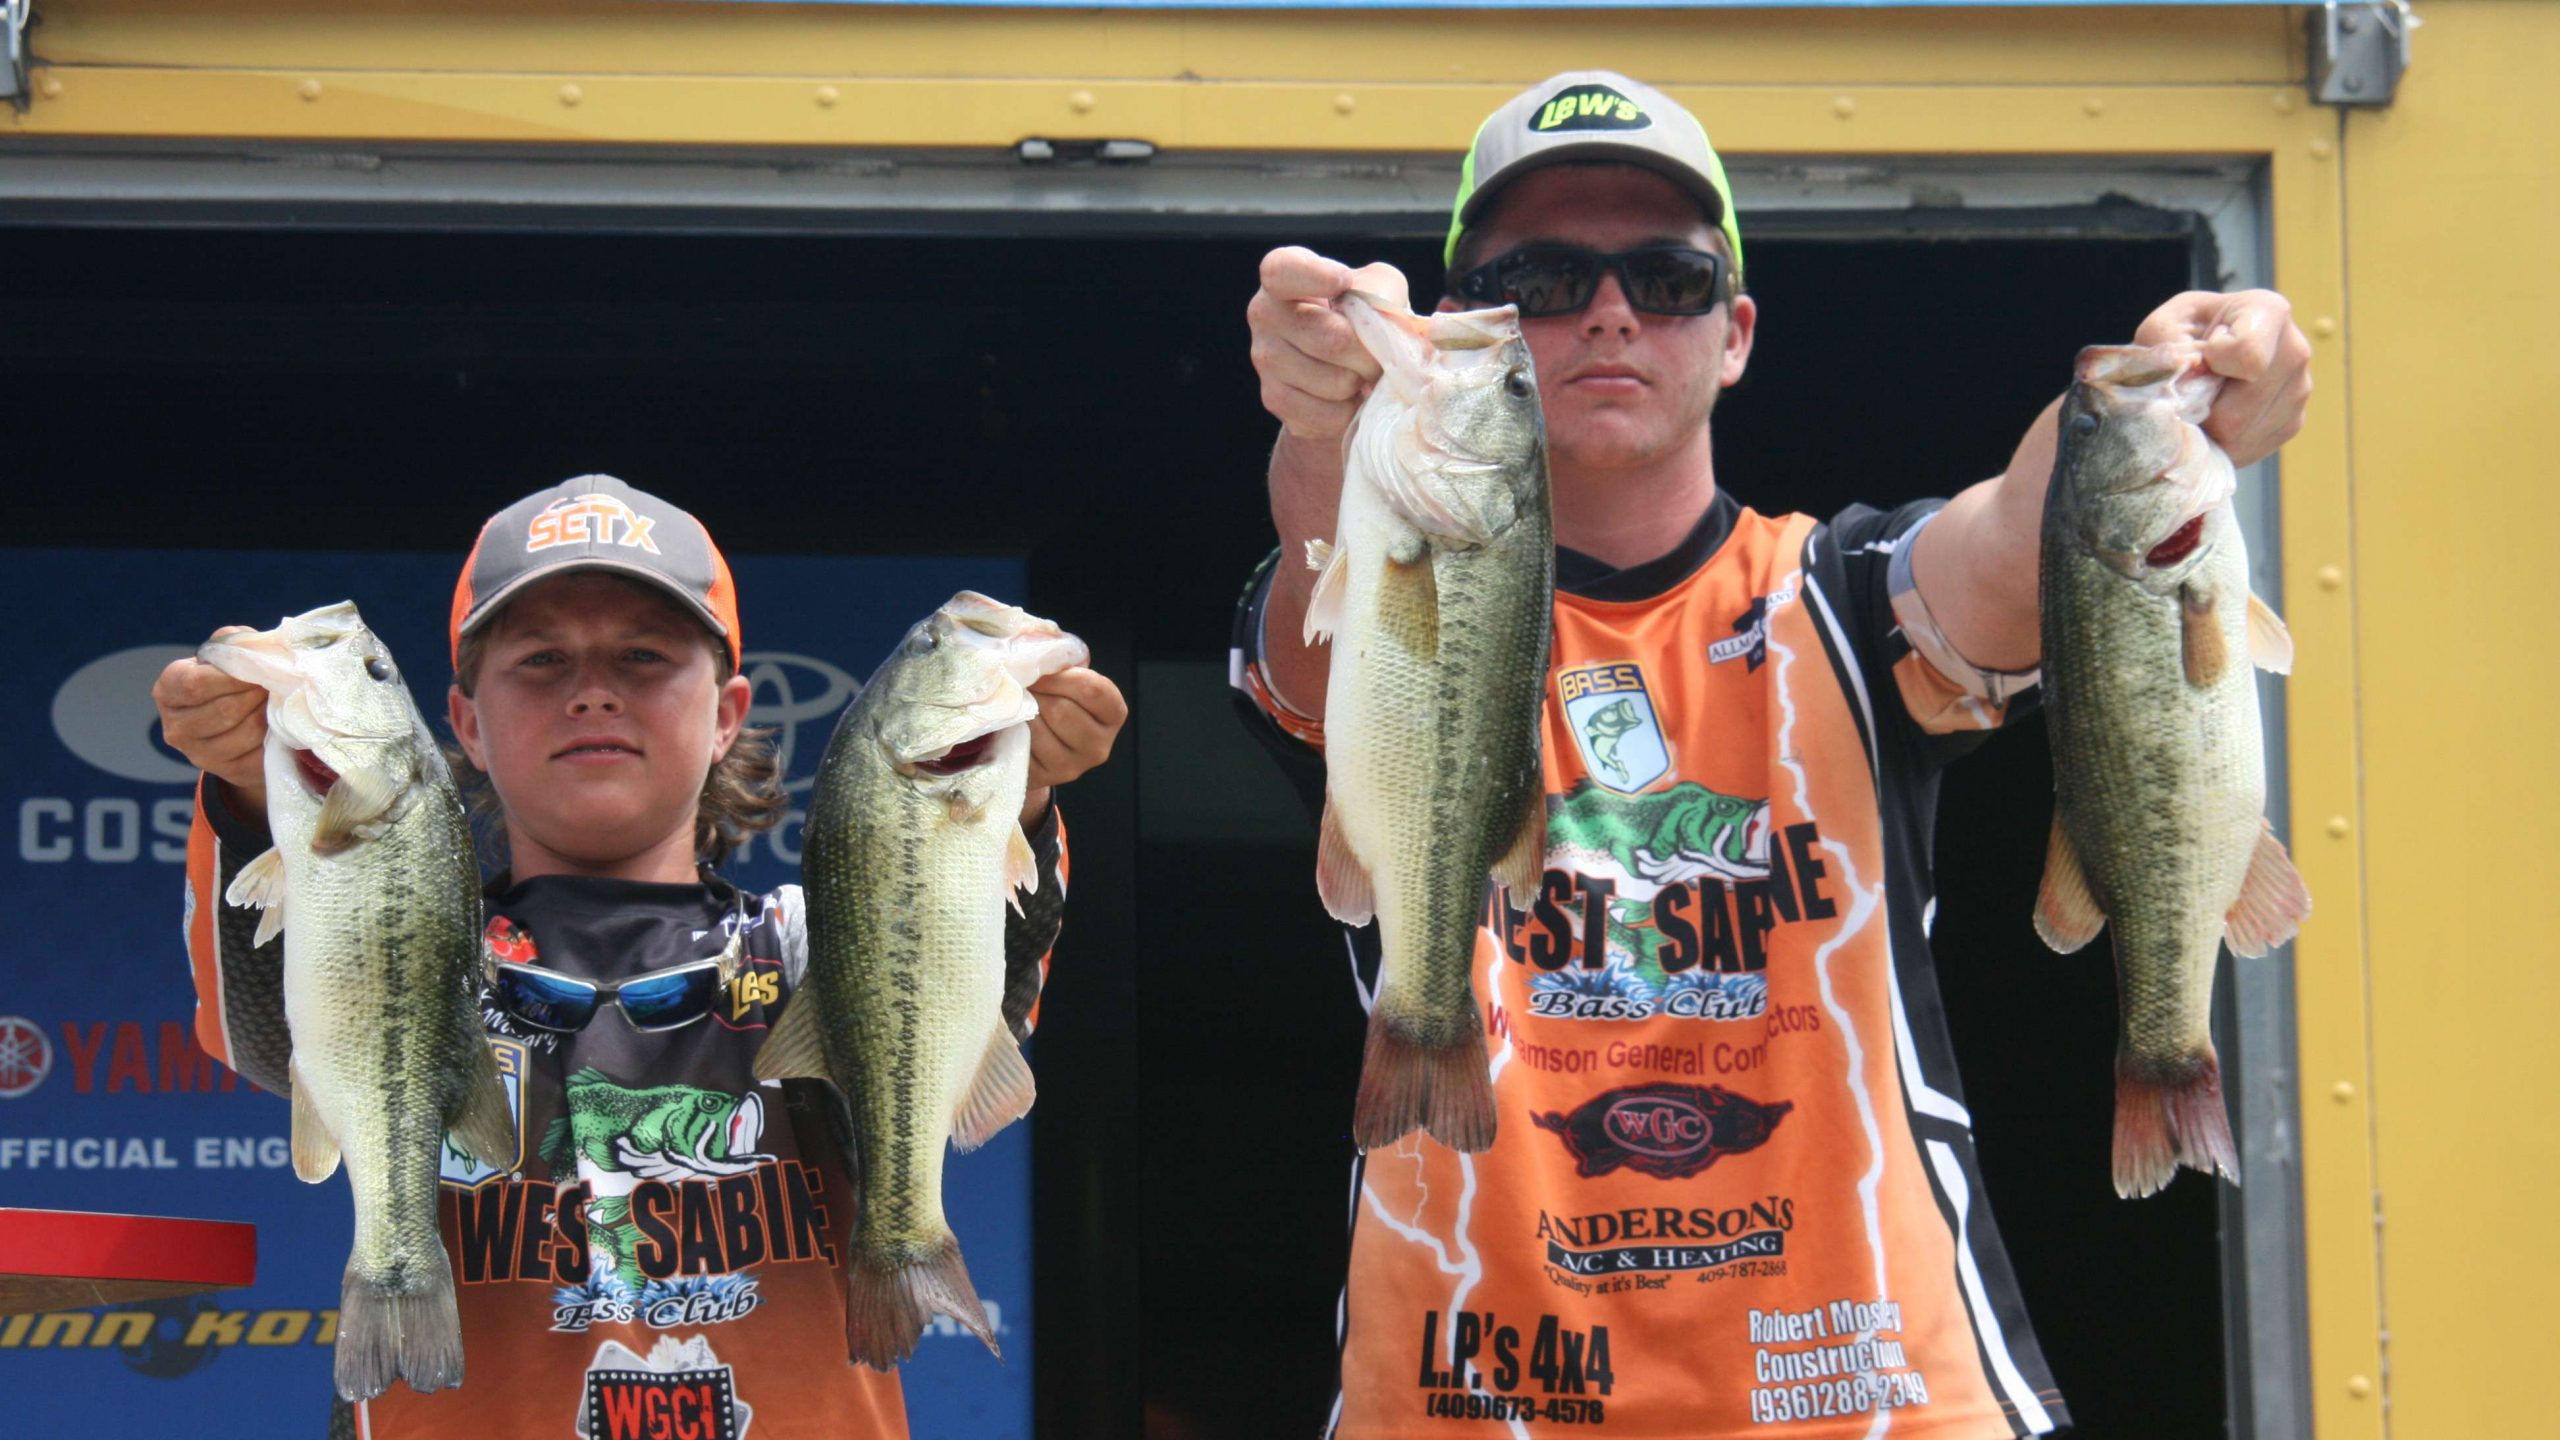 Landen McCary and Hunter Muncrief of West Sabine (Tex.) High were the other team to tie for third place overall with a five fish total of 12-9.